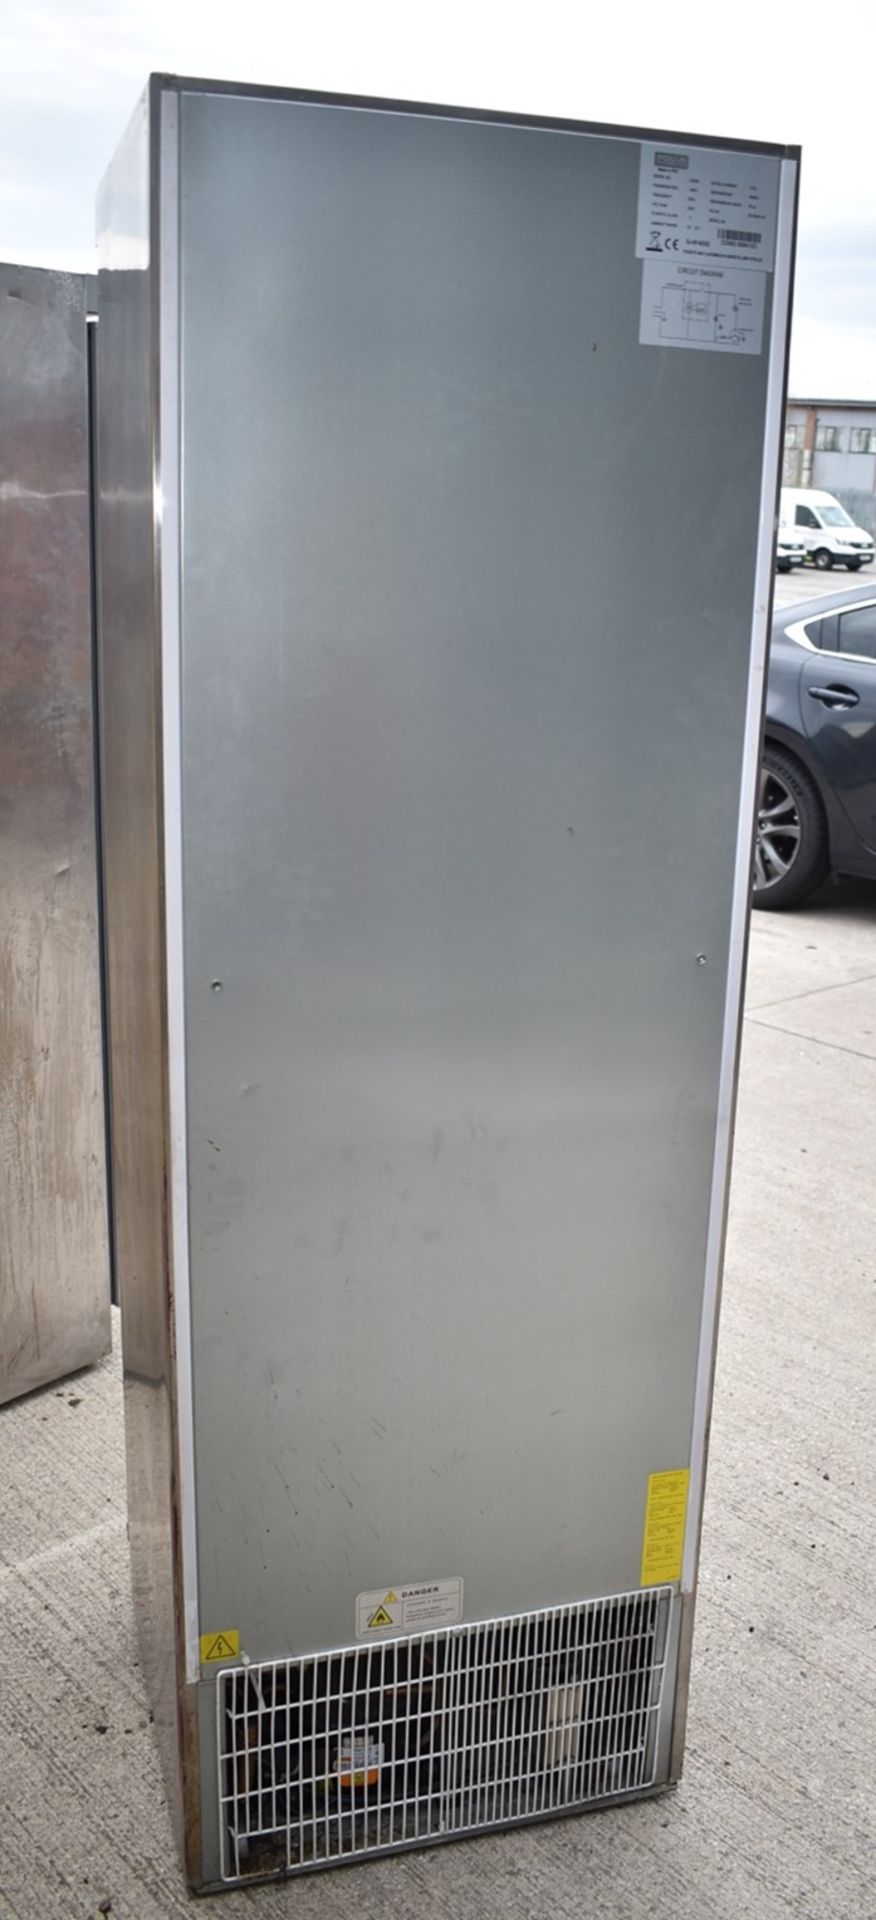 1 x Polar CD083 Upright Freezer With Stainless Steel Exterior - Dimensions: H185 x W60 x D60 cms - Image 8 of 10